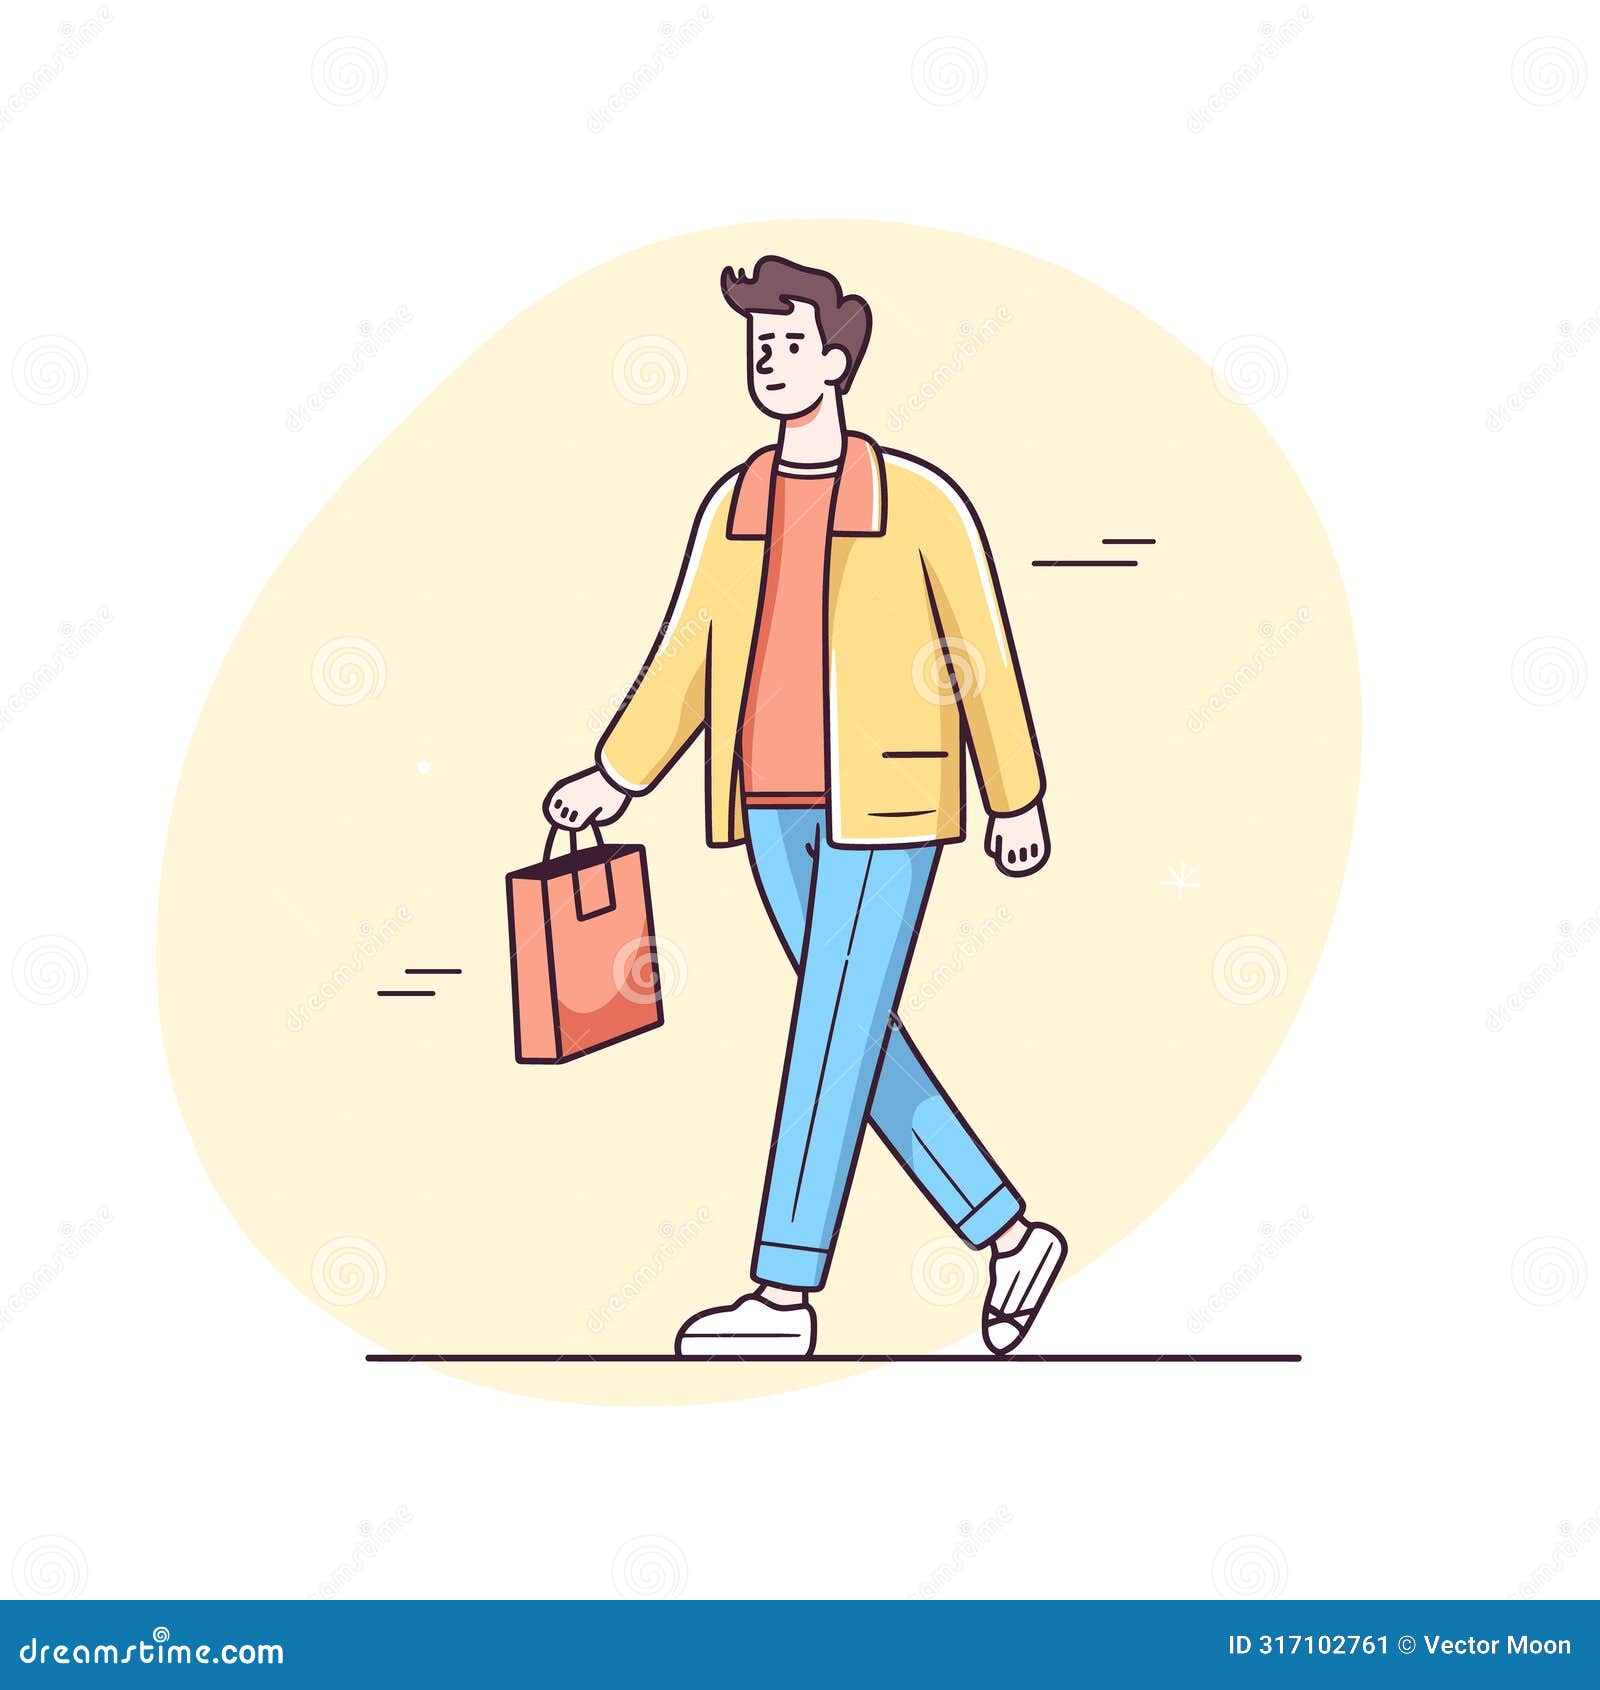 young man walking casually holding shopping bag, dressed yellow jacket, red shirt, blue jeans